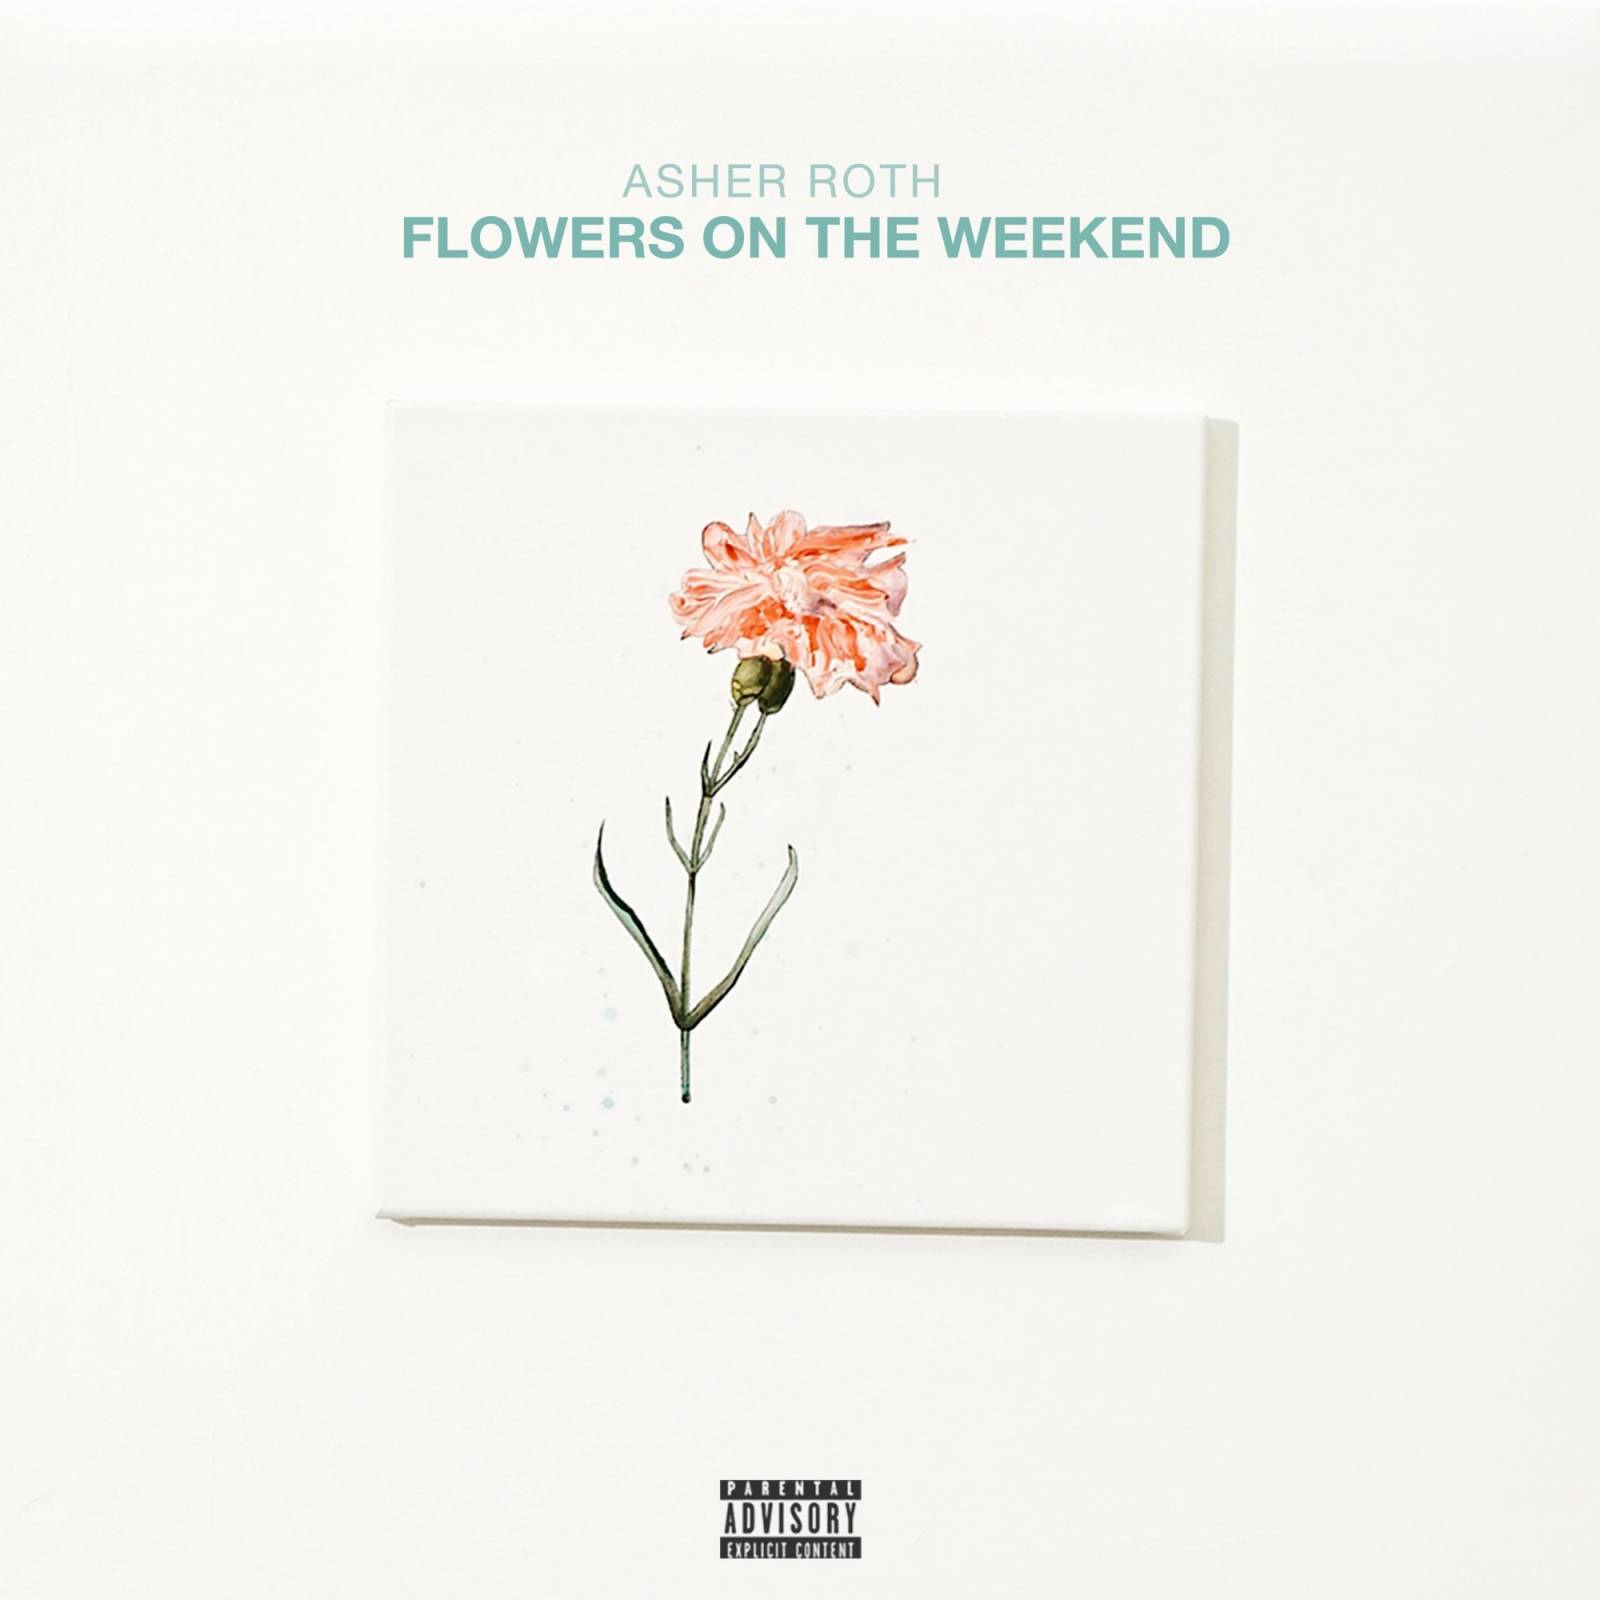 Asher Roth Returns With 'Flowers On The Weekend' Album